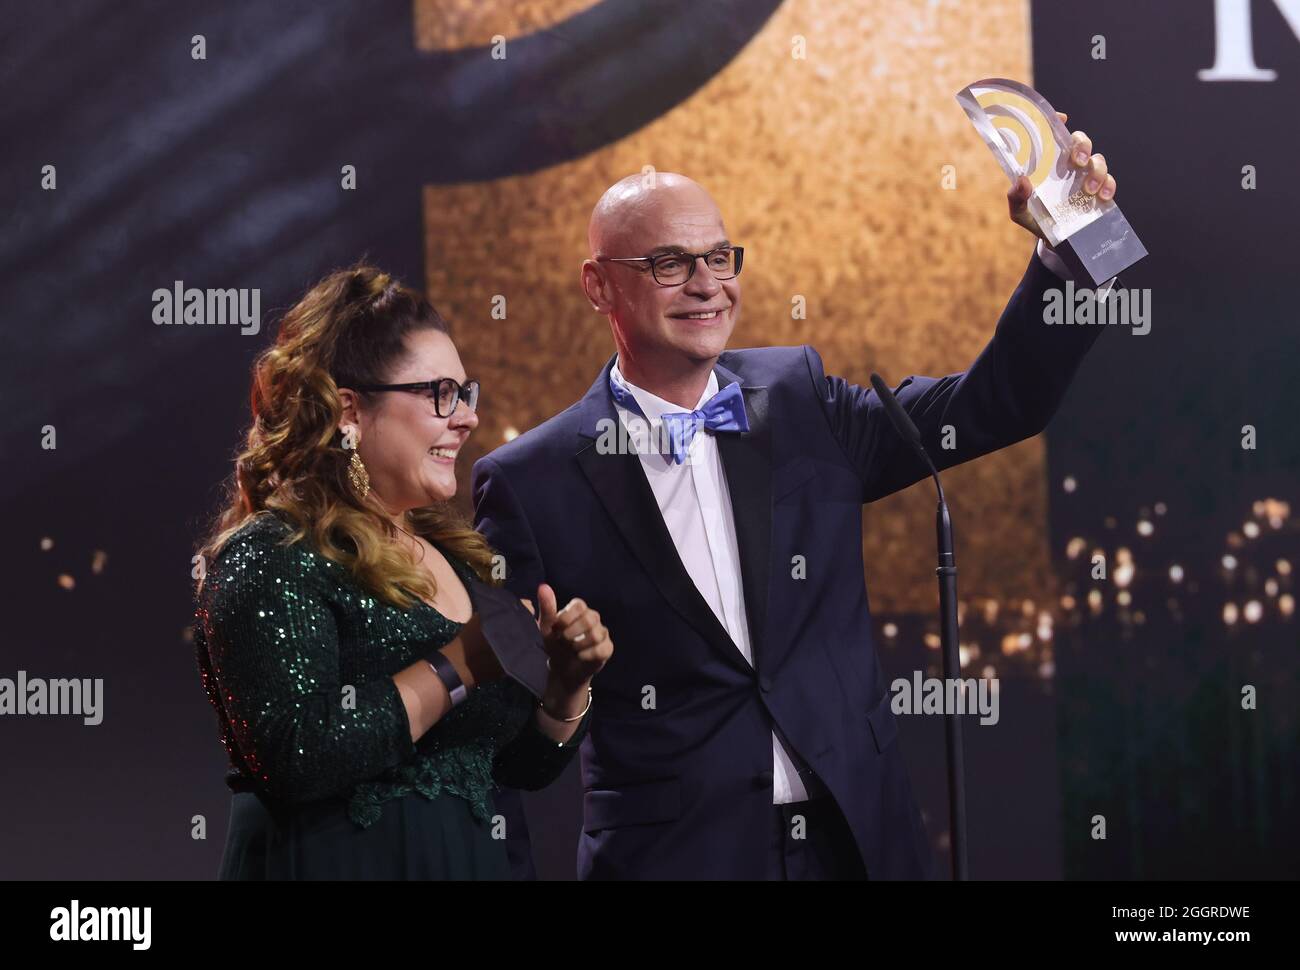 Hamburg, Germany. 02nd Sep, 2021. Steffen Lukas and Claudia Switala from RADIO  PSR are on stage at the German Radio Awards 2021 and are happy about the  award for "Best Morning Show"